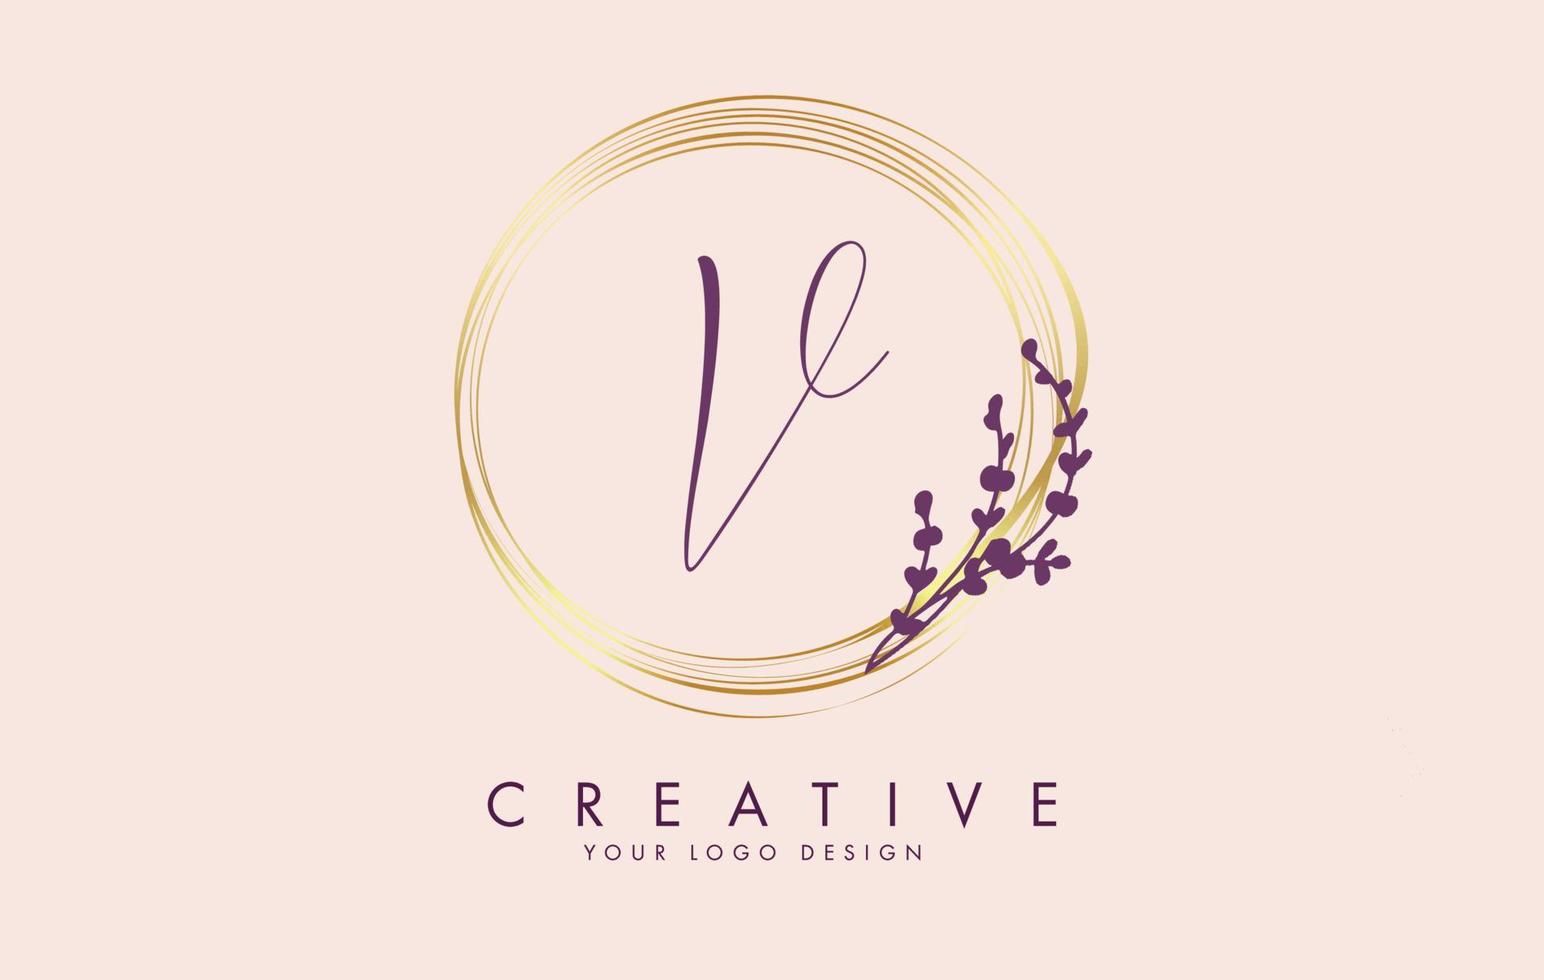 Handwritten V Letter logo design with golden circles and purple leaves on branches around. Vector Illustration with V letter.